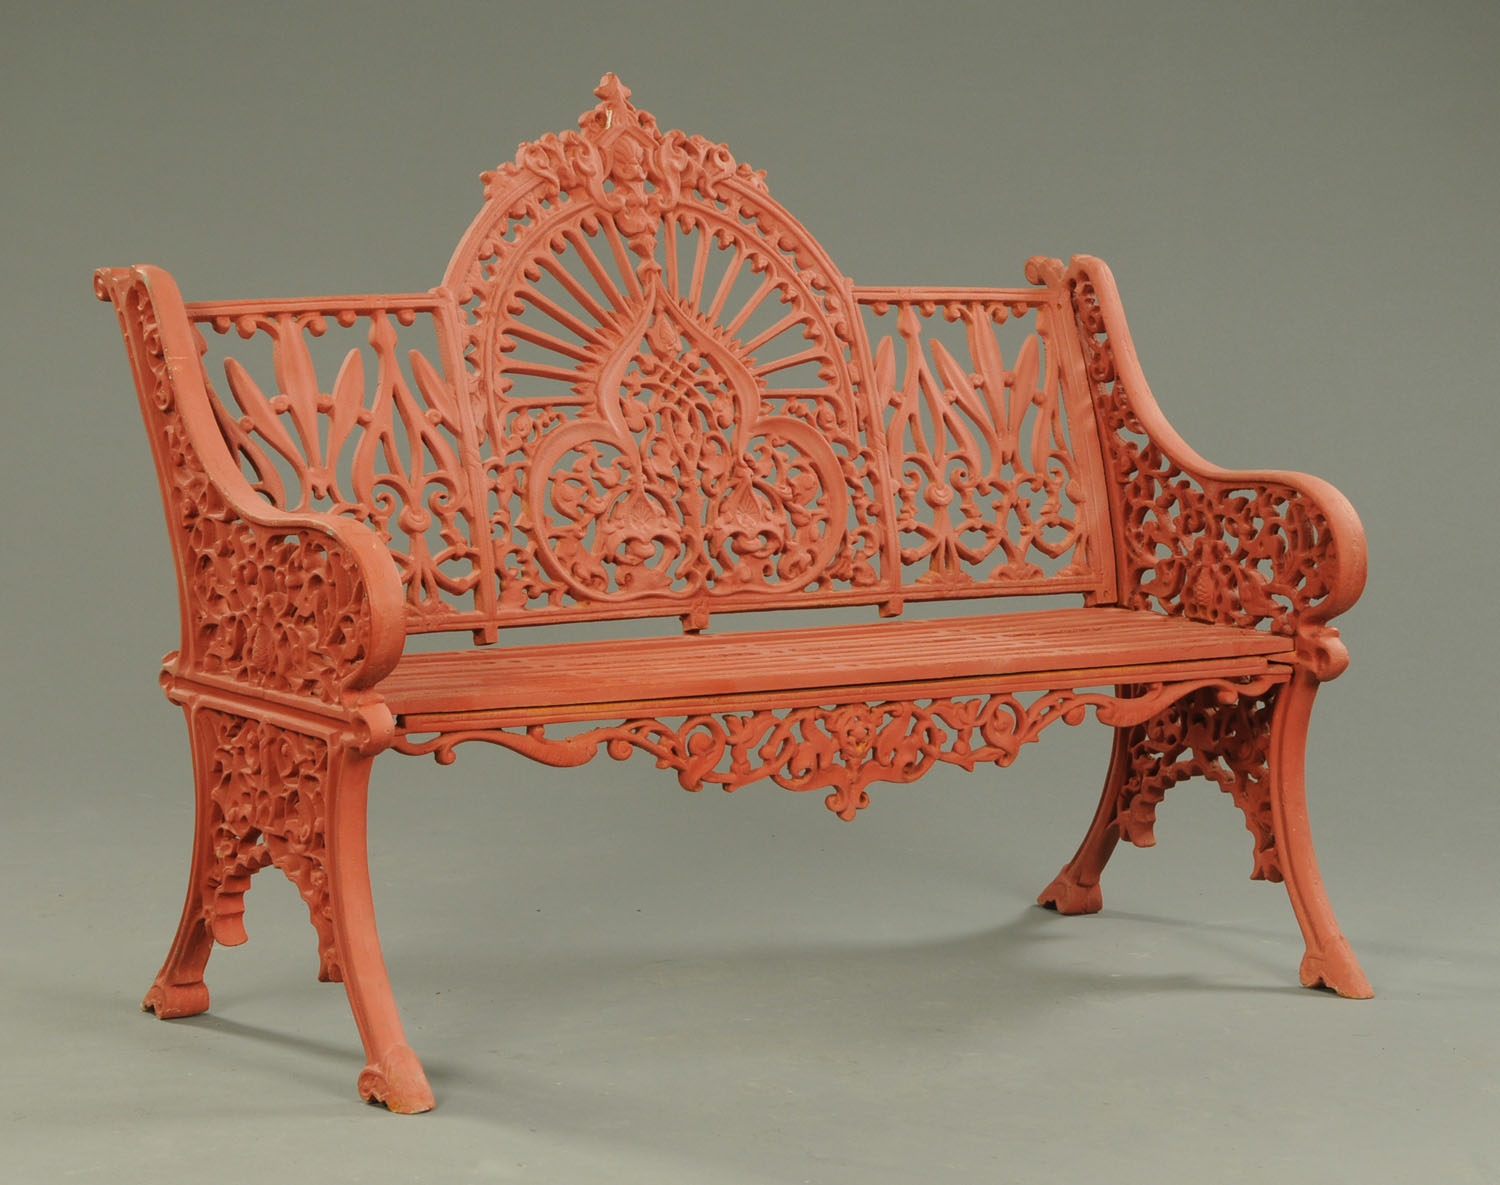 A Victorian style cast iron garden bench. Width 118 cm (see illustration).